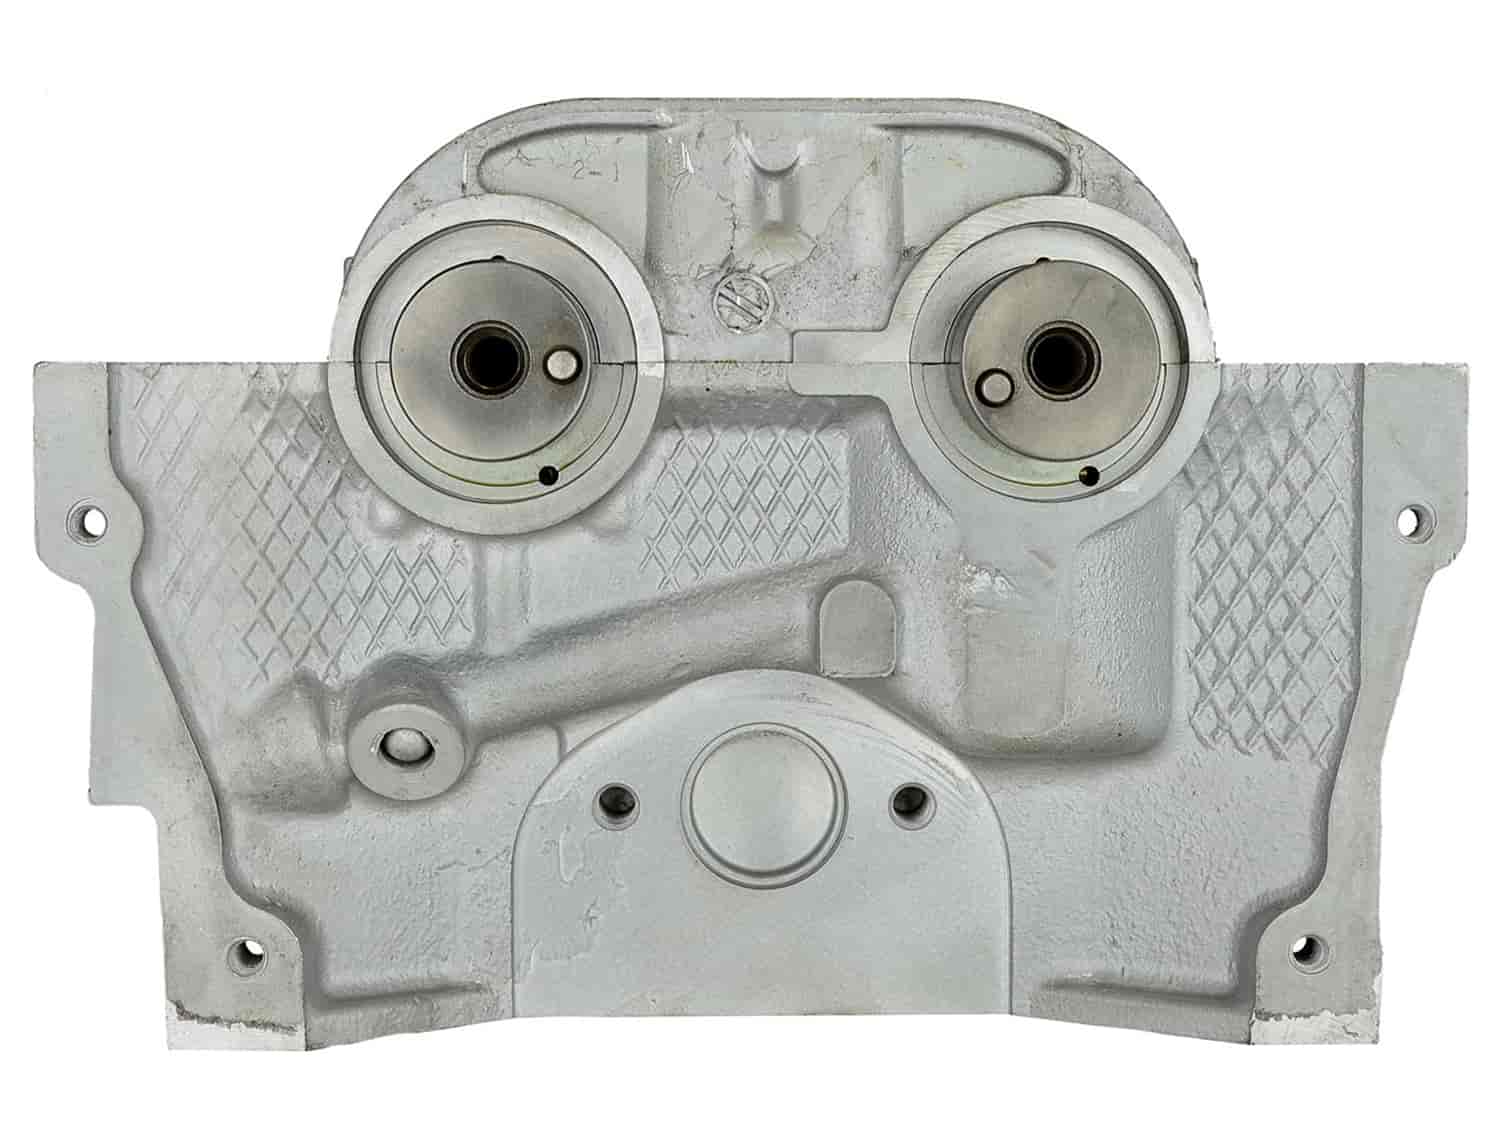 Remanufactured Cylinder Head for 1999-2001 Mazda Protege with 1.6L L4